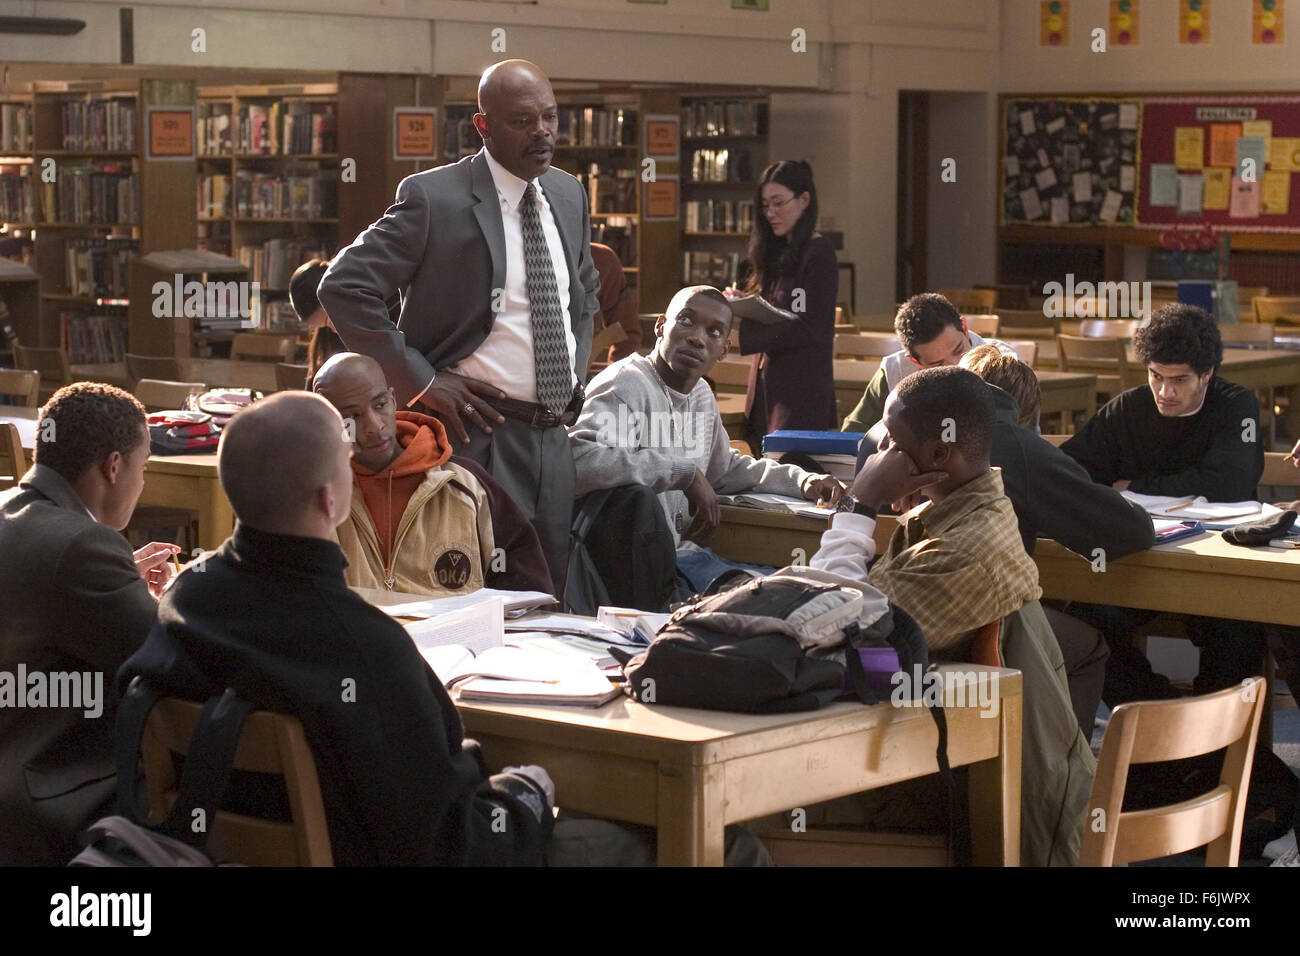 RELEASE DATE: January 14, 2005. MOVIE TITLE: Coach Carter. STUDIO: MTV  Films. PLOT: Controversy surrounds high school basketball coach Ken Carter  after he benches his entire team for their breaking their academic